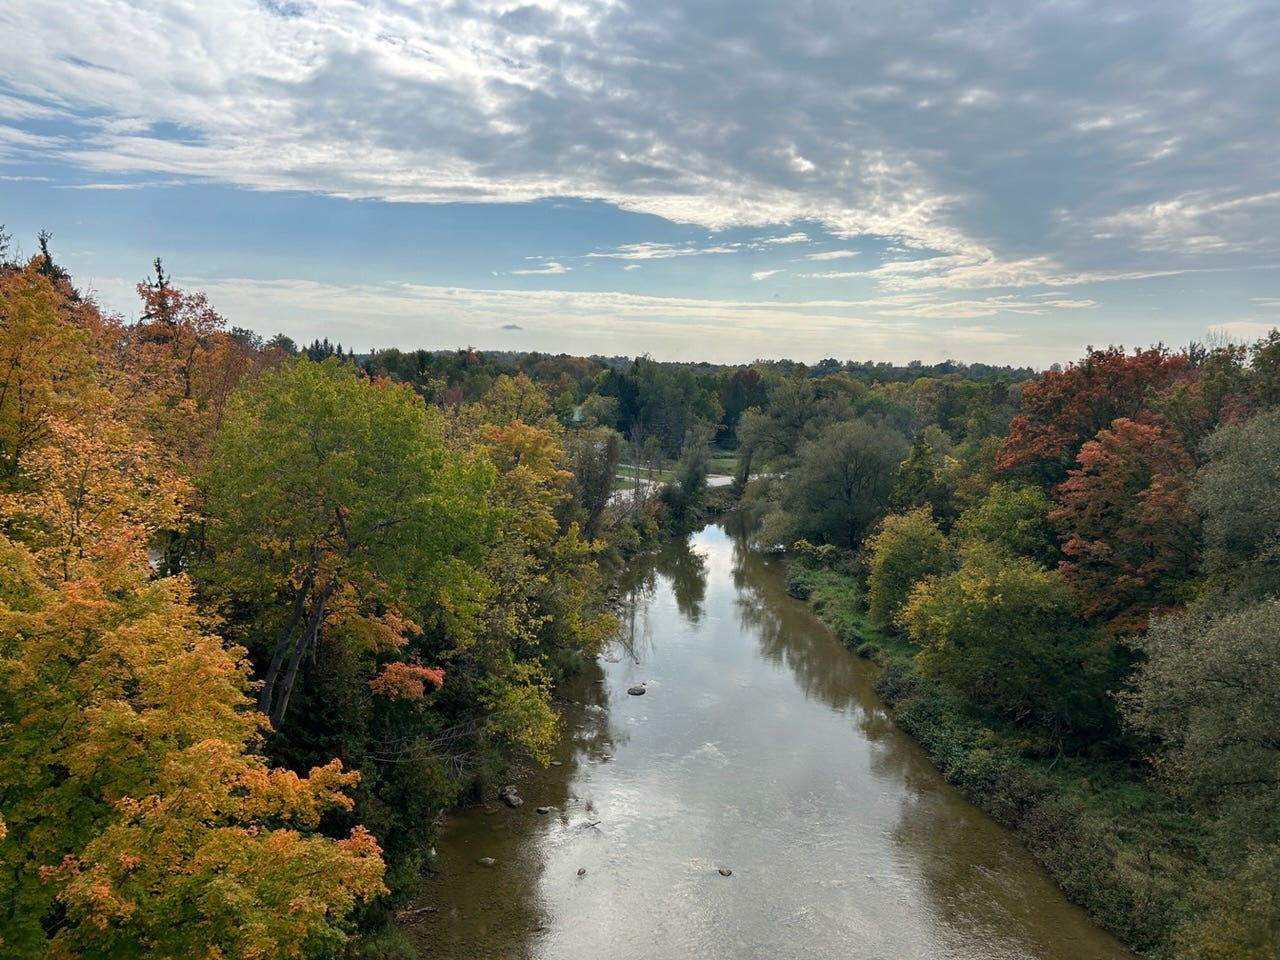 View looking down on a river with trees changing colour and the blue sky and clouds overhead.